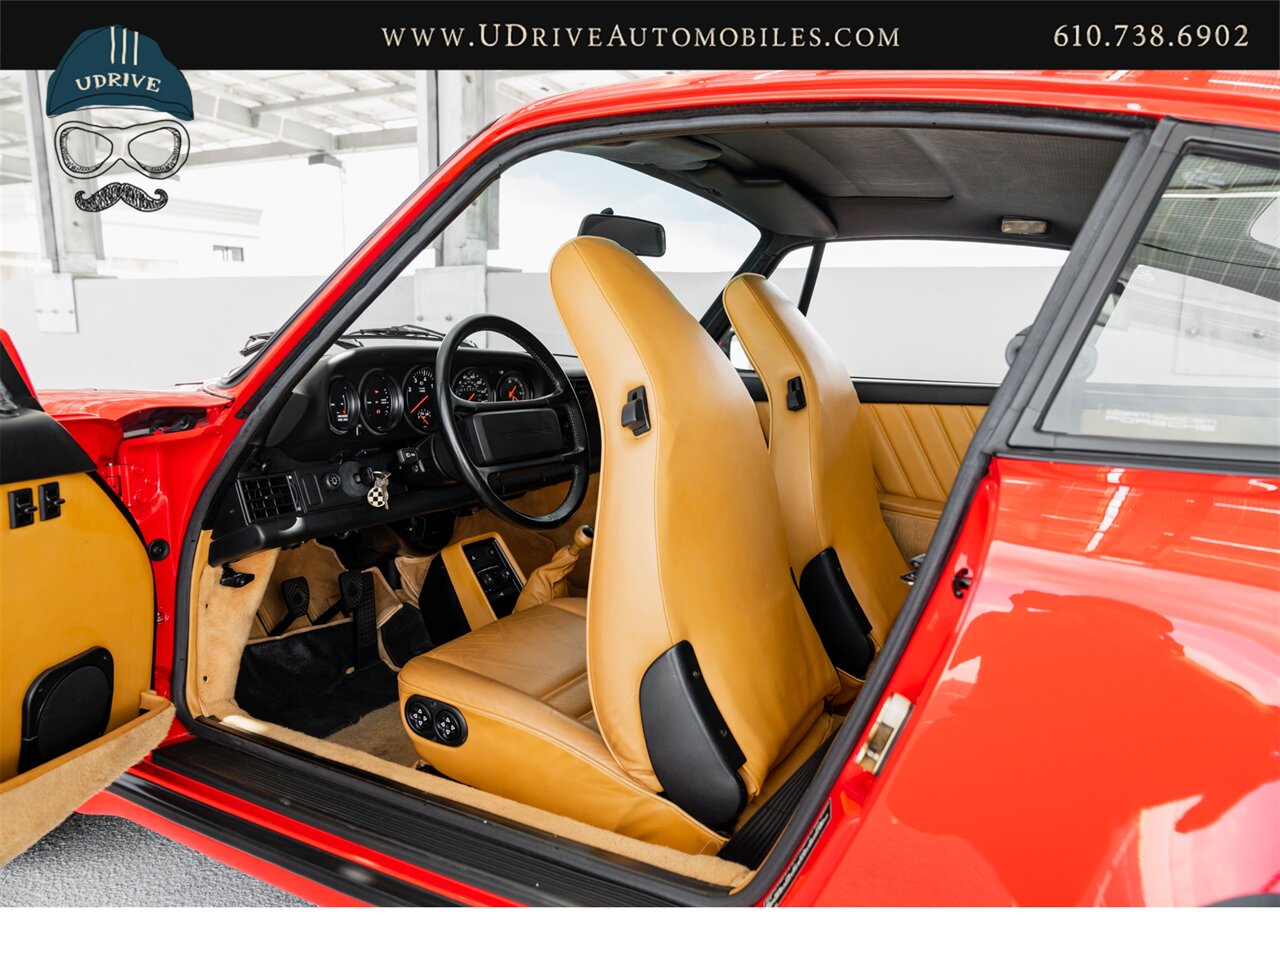 1987 Porsche 911 930 Turbo 12k Miles Guards Red over  Champagne Special Leather - Photo 38 - West Chester, PA 19382